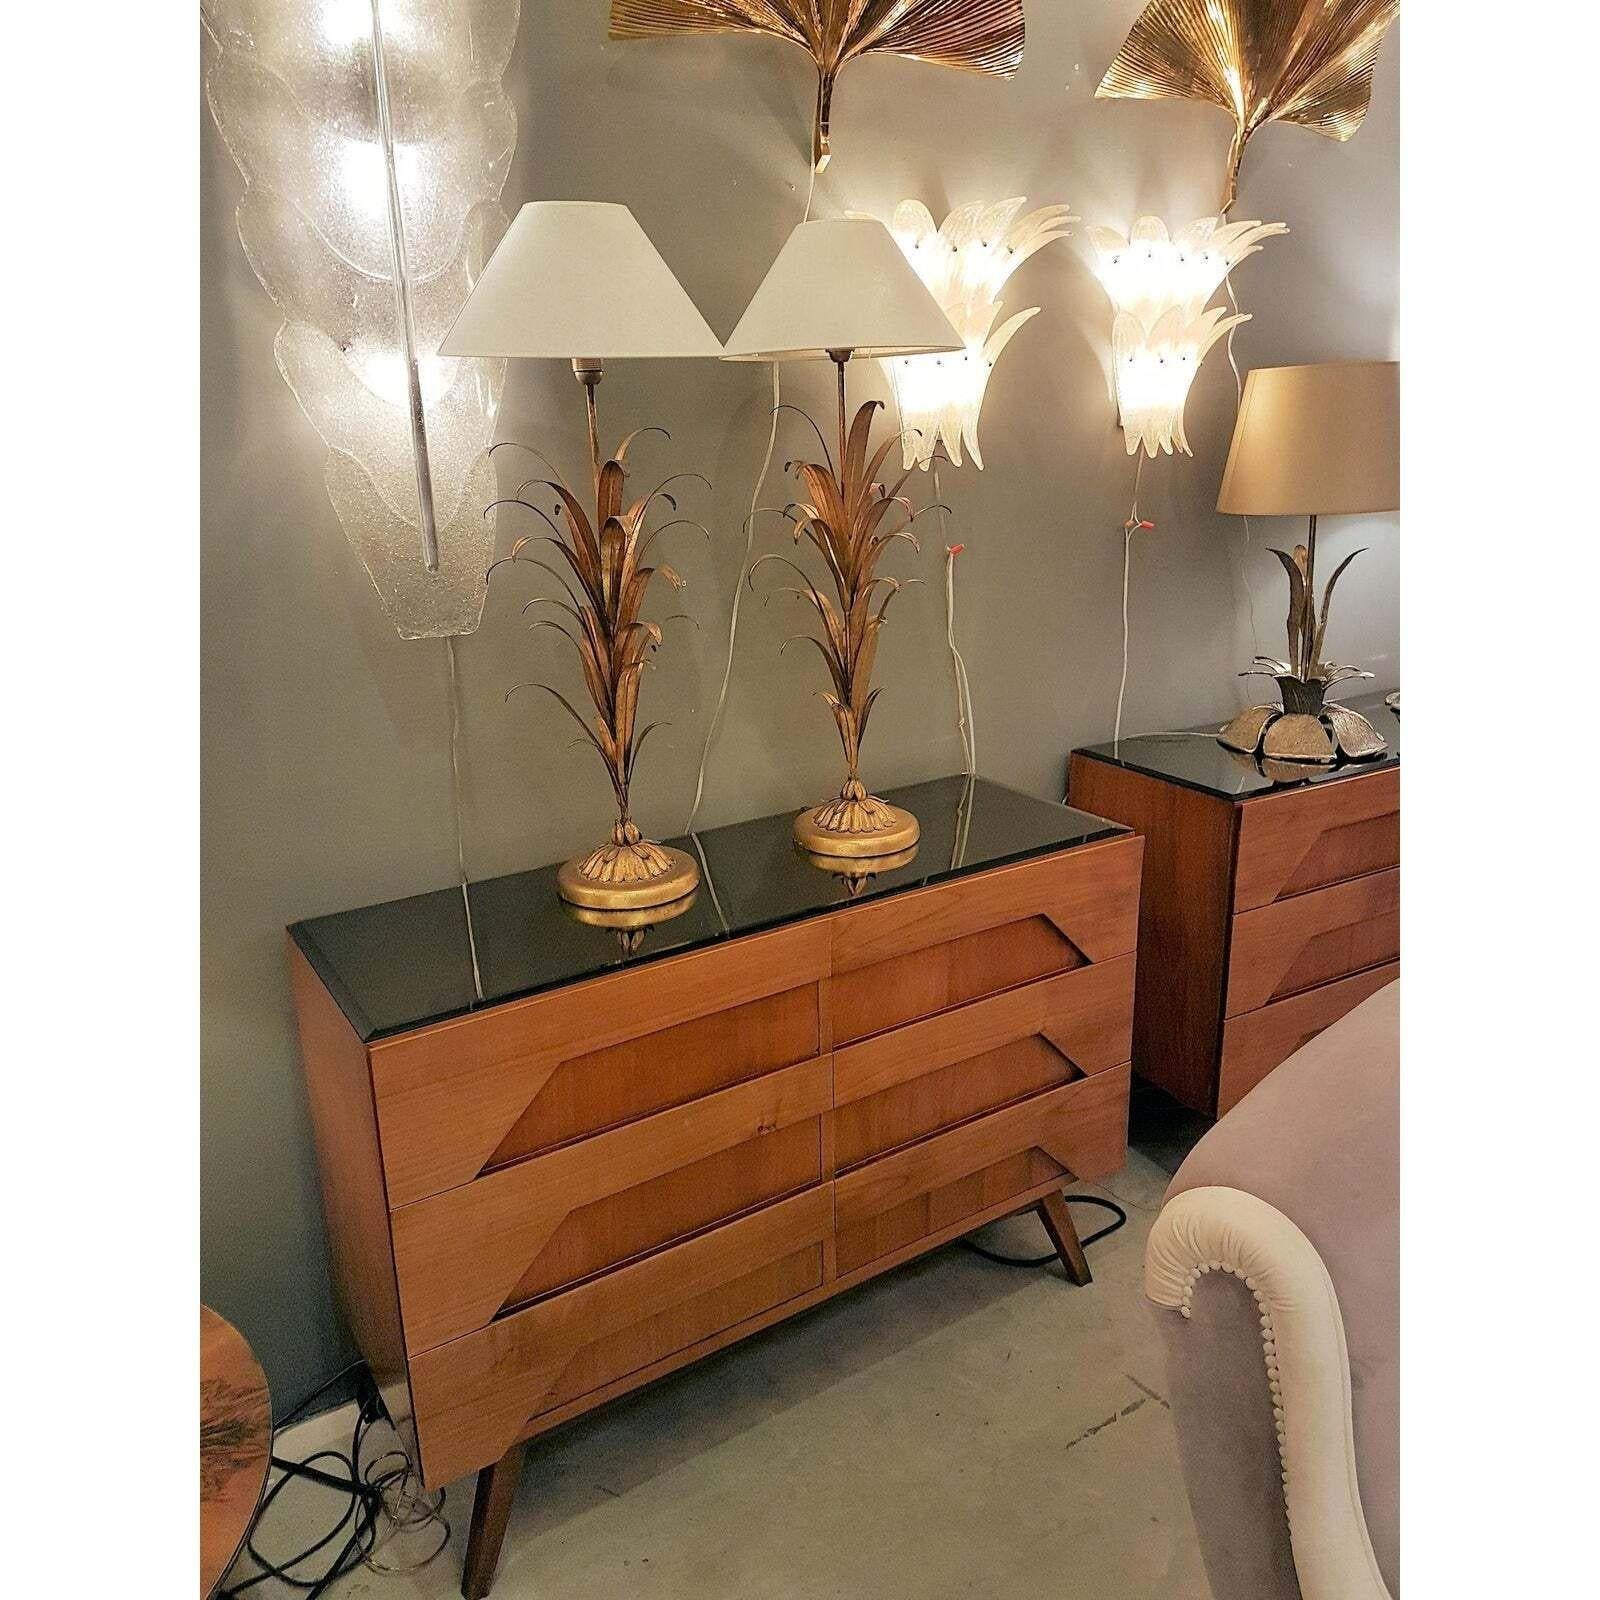 Pair of tall Mid-Century Modern wheat leaf bouquet table lamps, in the style of Coco Chanel, France circa 1940.
The vintage lamps are made of gilt metal.
The pair of table lamps has 1 light each and is rewired for the US: with a Medium base bulb, or